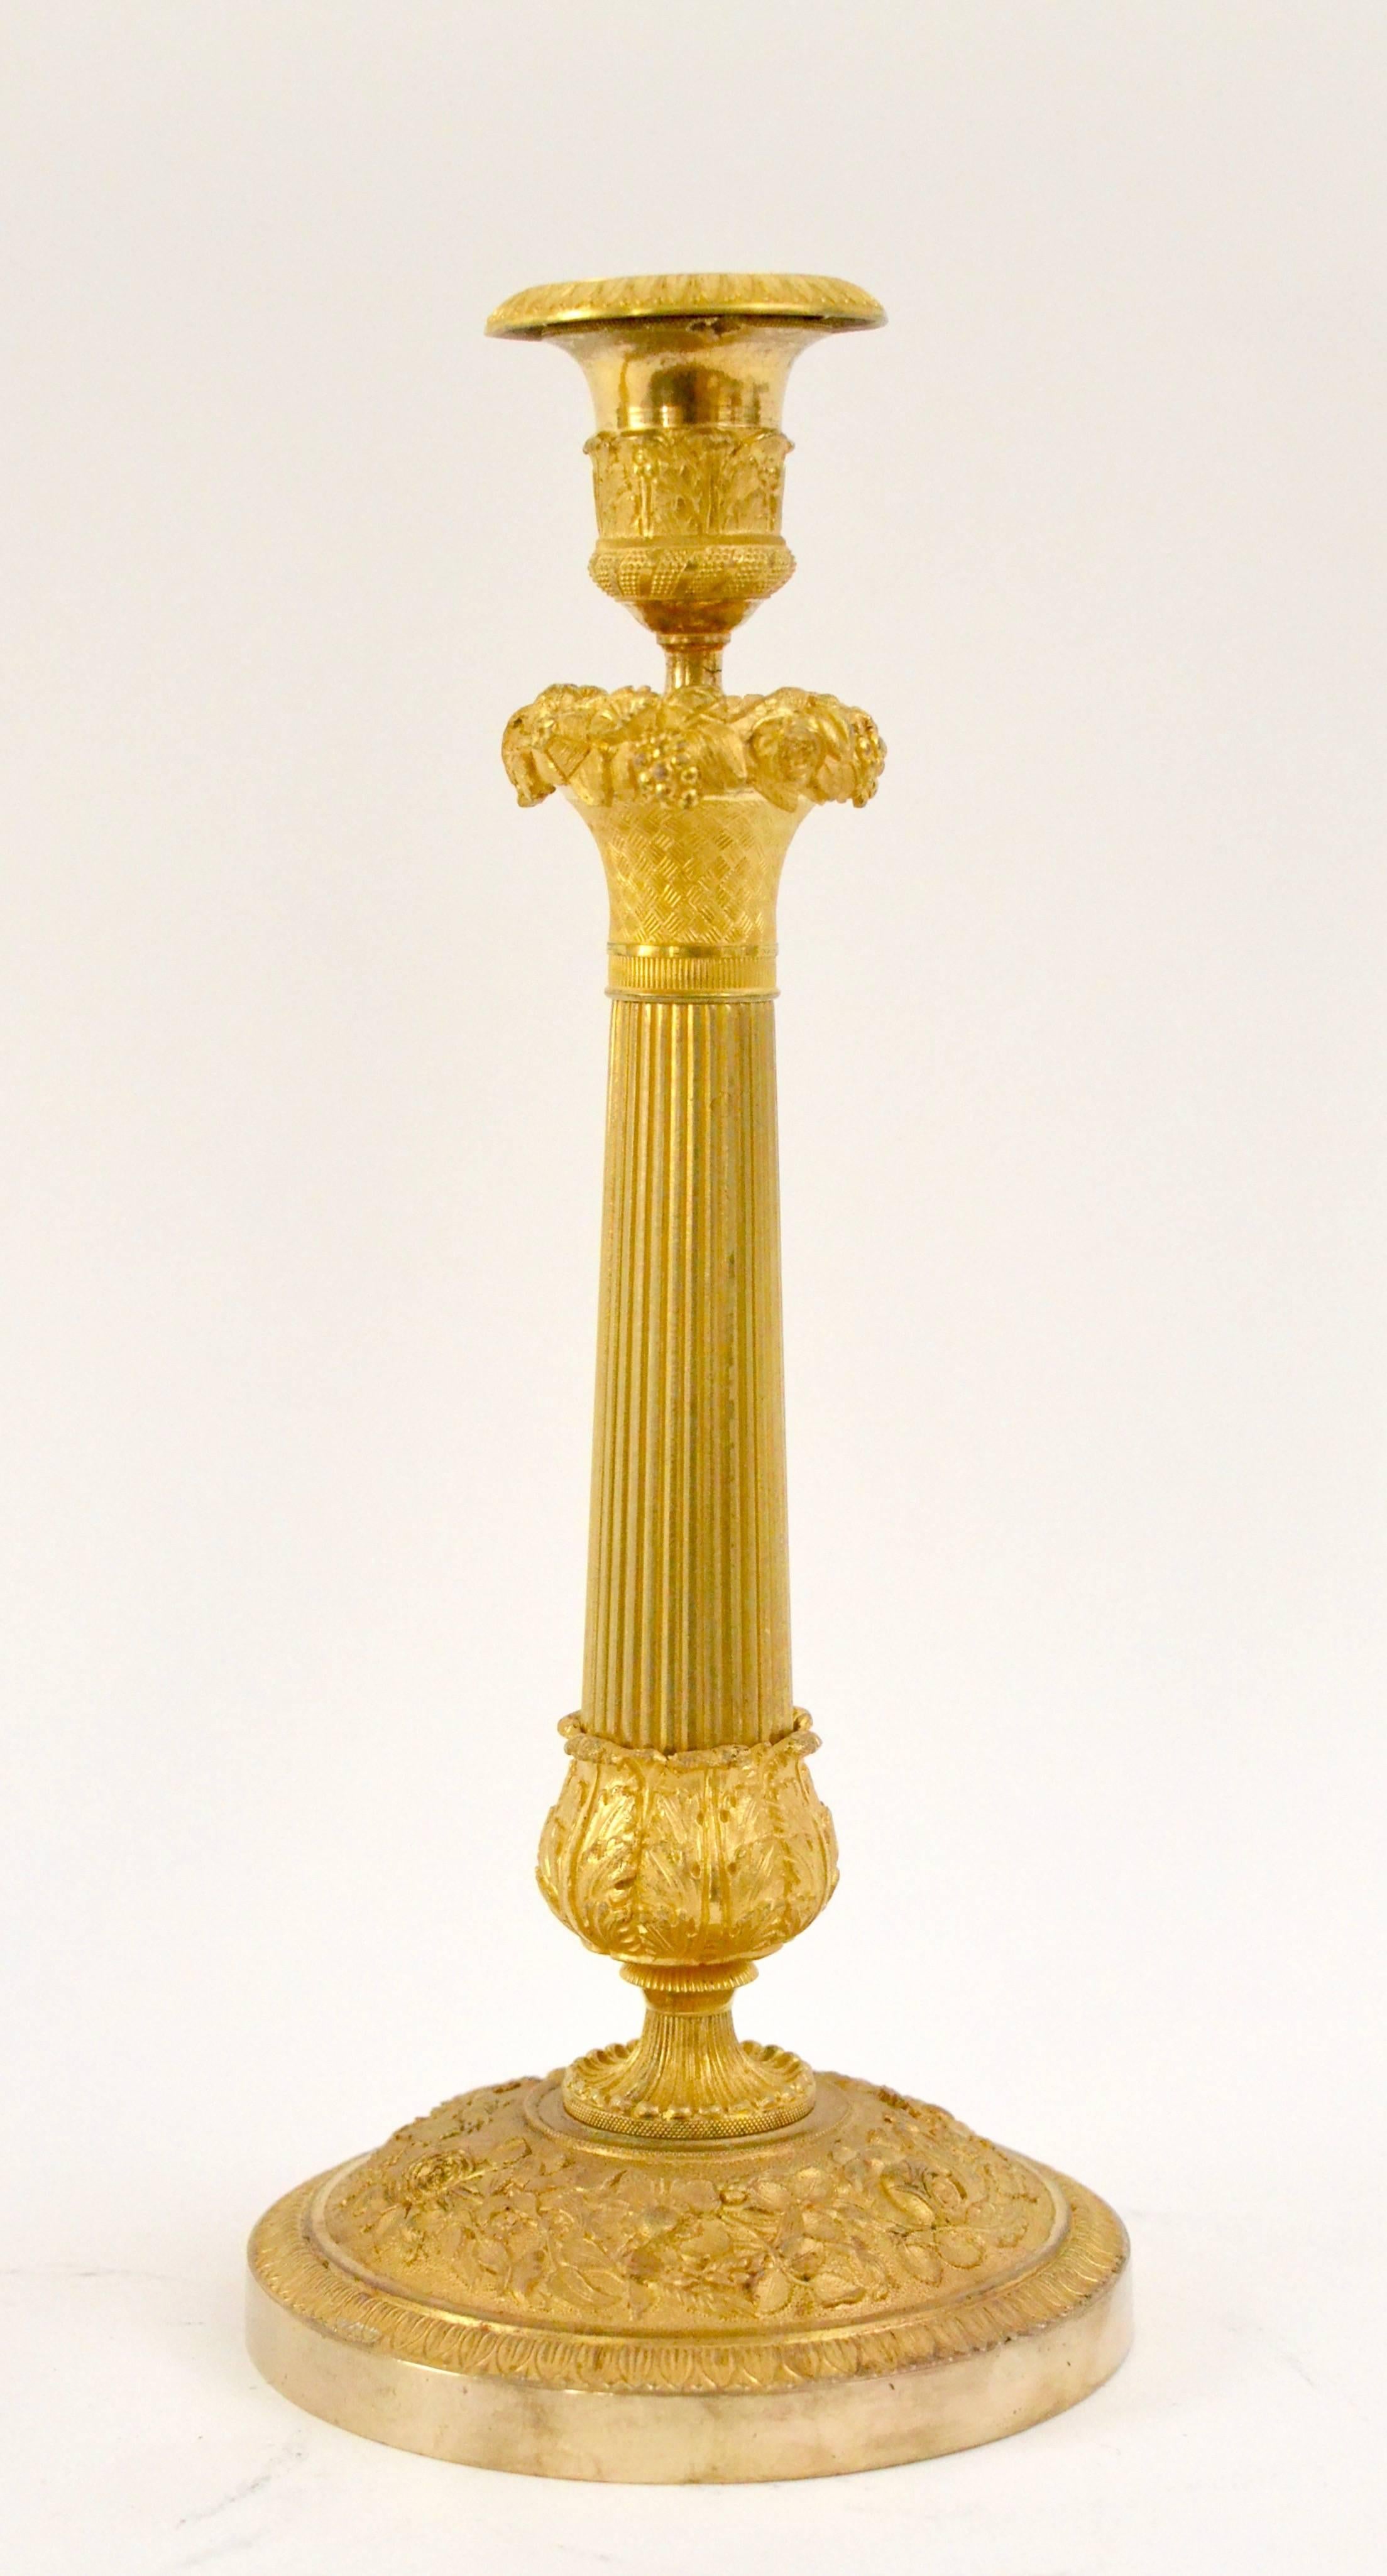 A pair of gilt bronze Empire candlesticks, early 19th century.